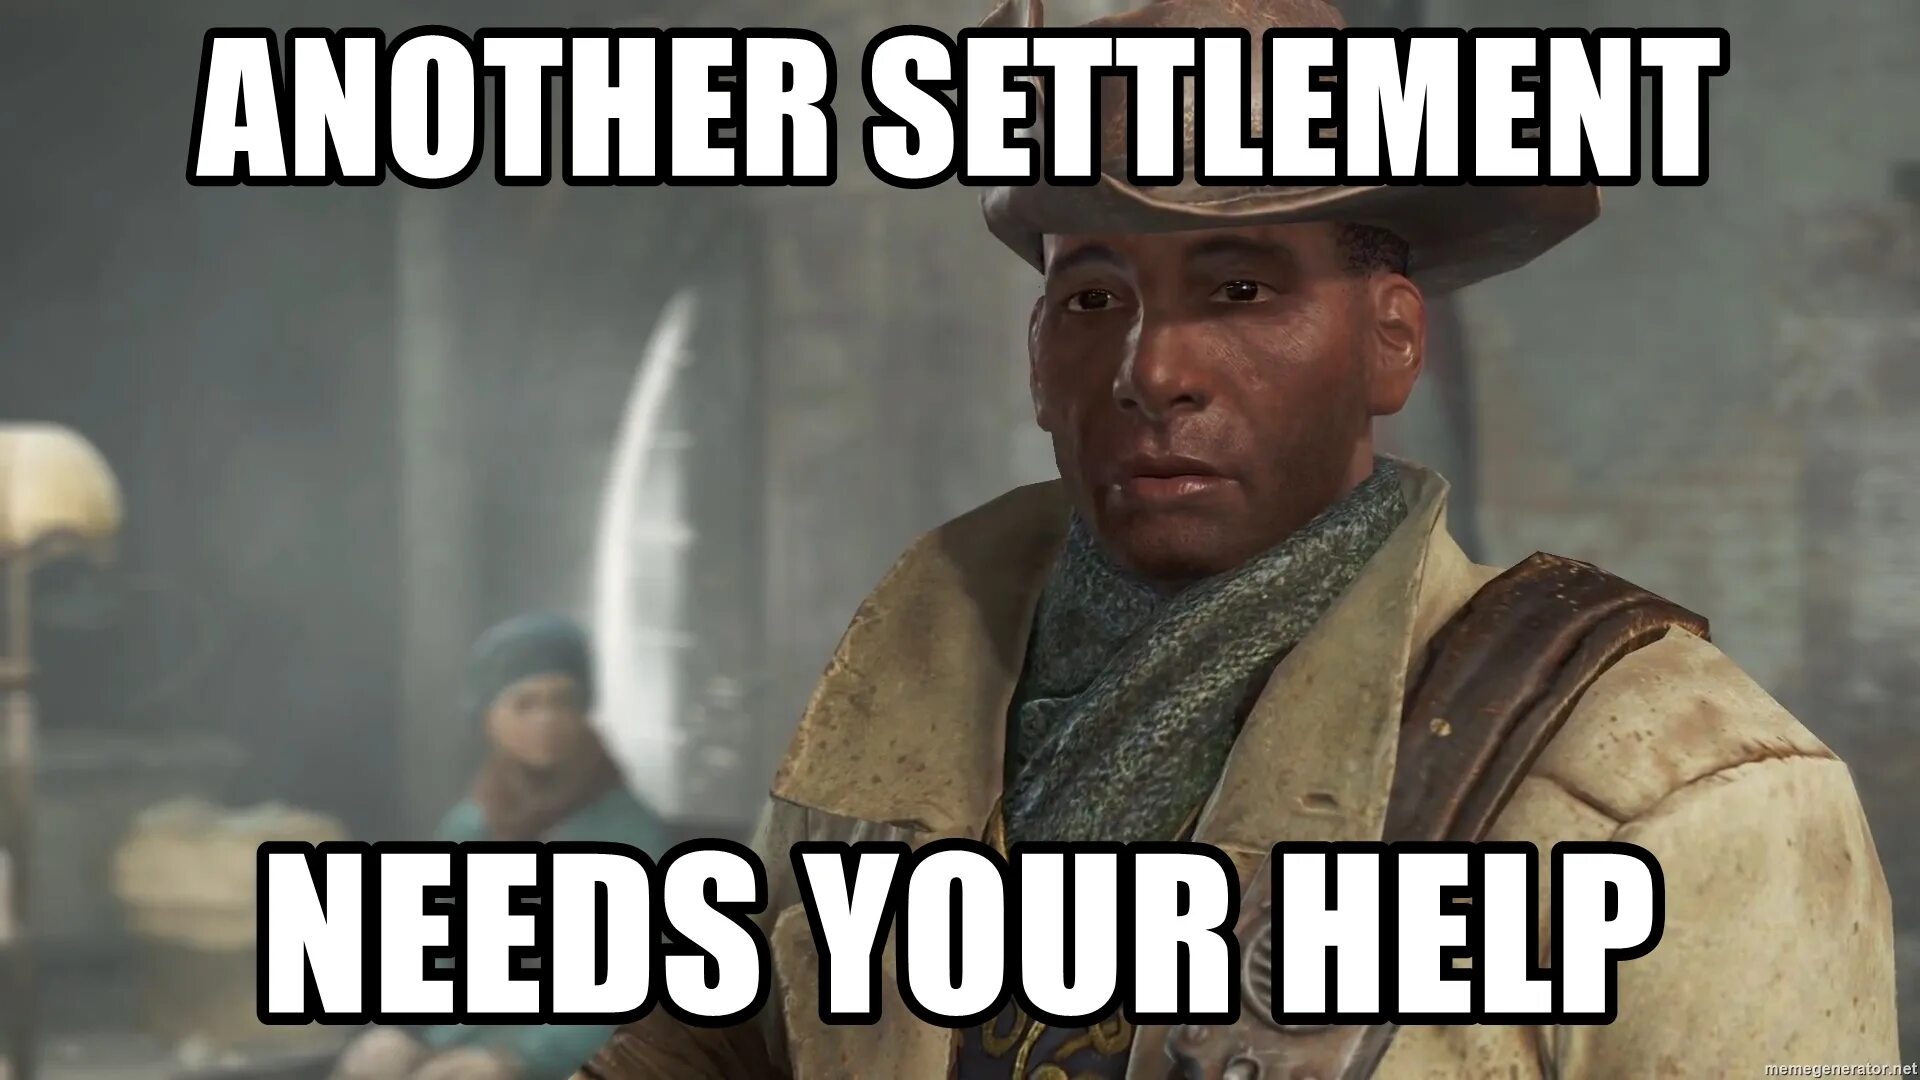 We need to turn. Престон Гарви Мем. Another Settlement needs your help. Старфилд Мем. Престон Гарви Fallout 4 Мем.